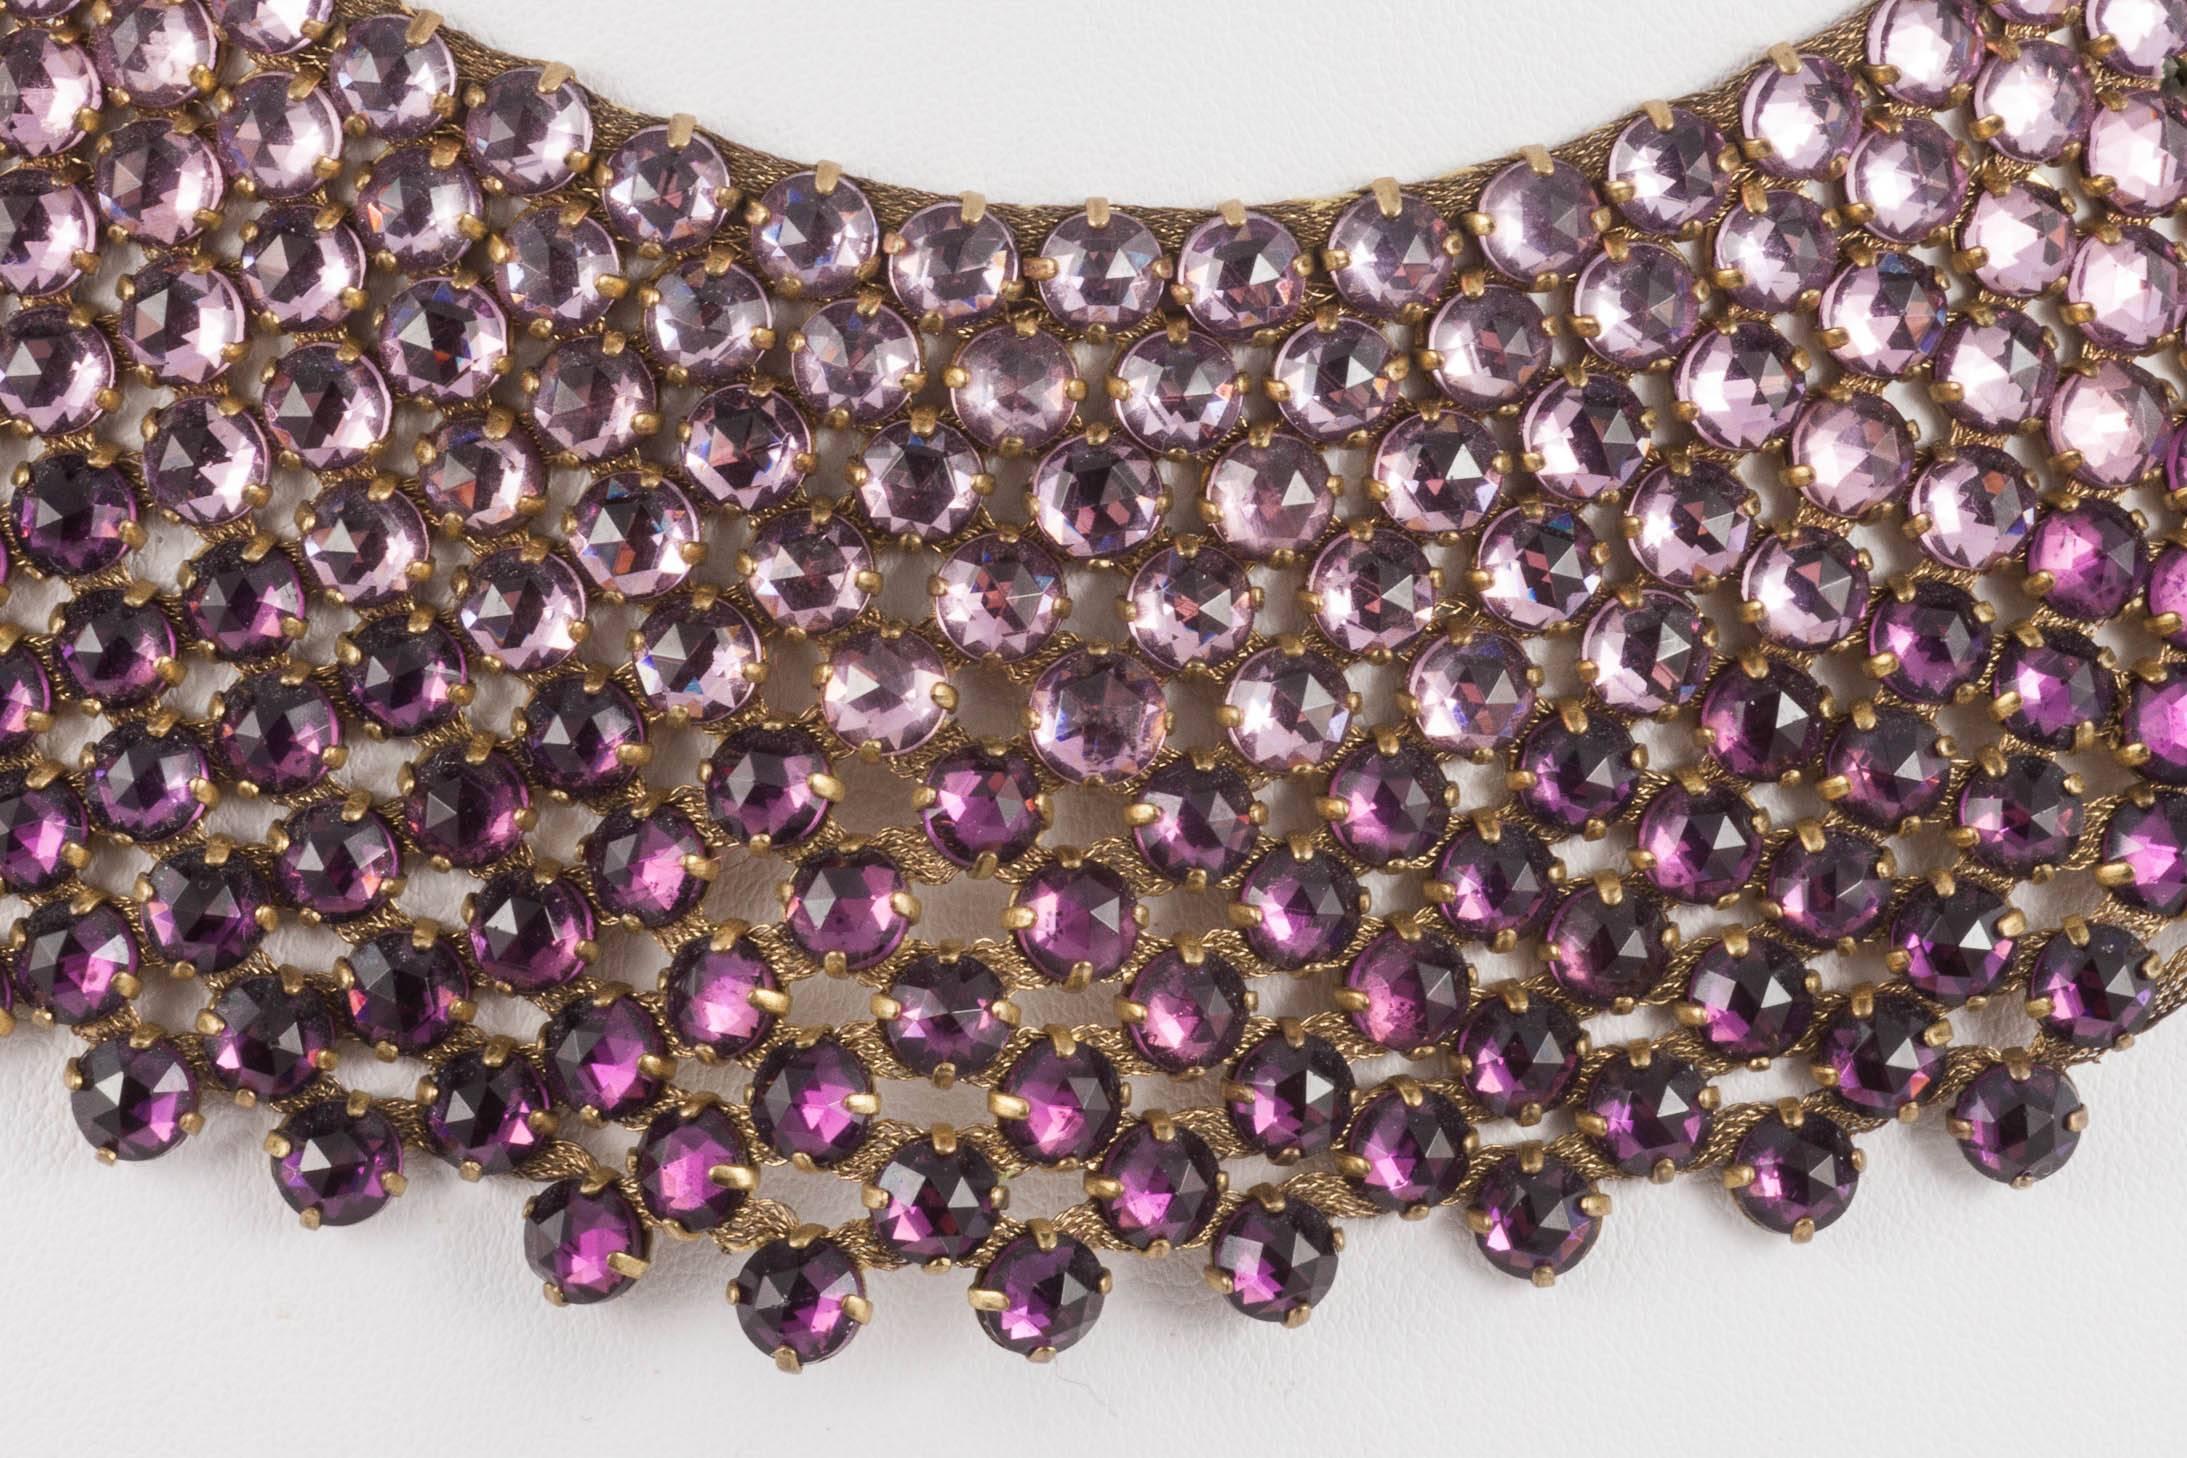 Amethyst glass faceted cabuchon collar and matching earrings, att. Lanvin, 1920s In Good Condition For Sale In Greyabbey, County Down